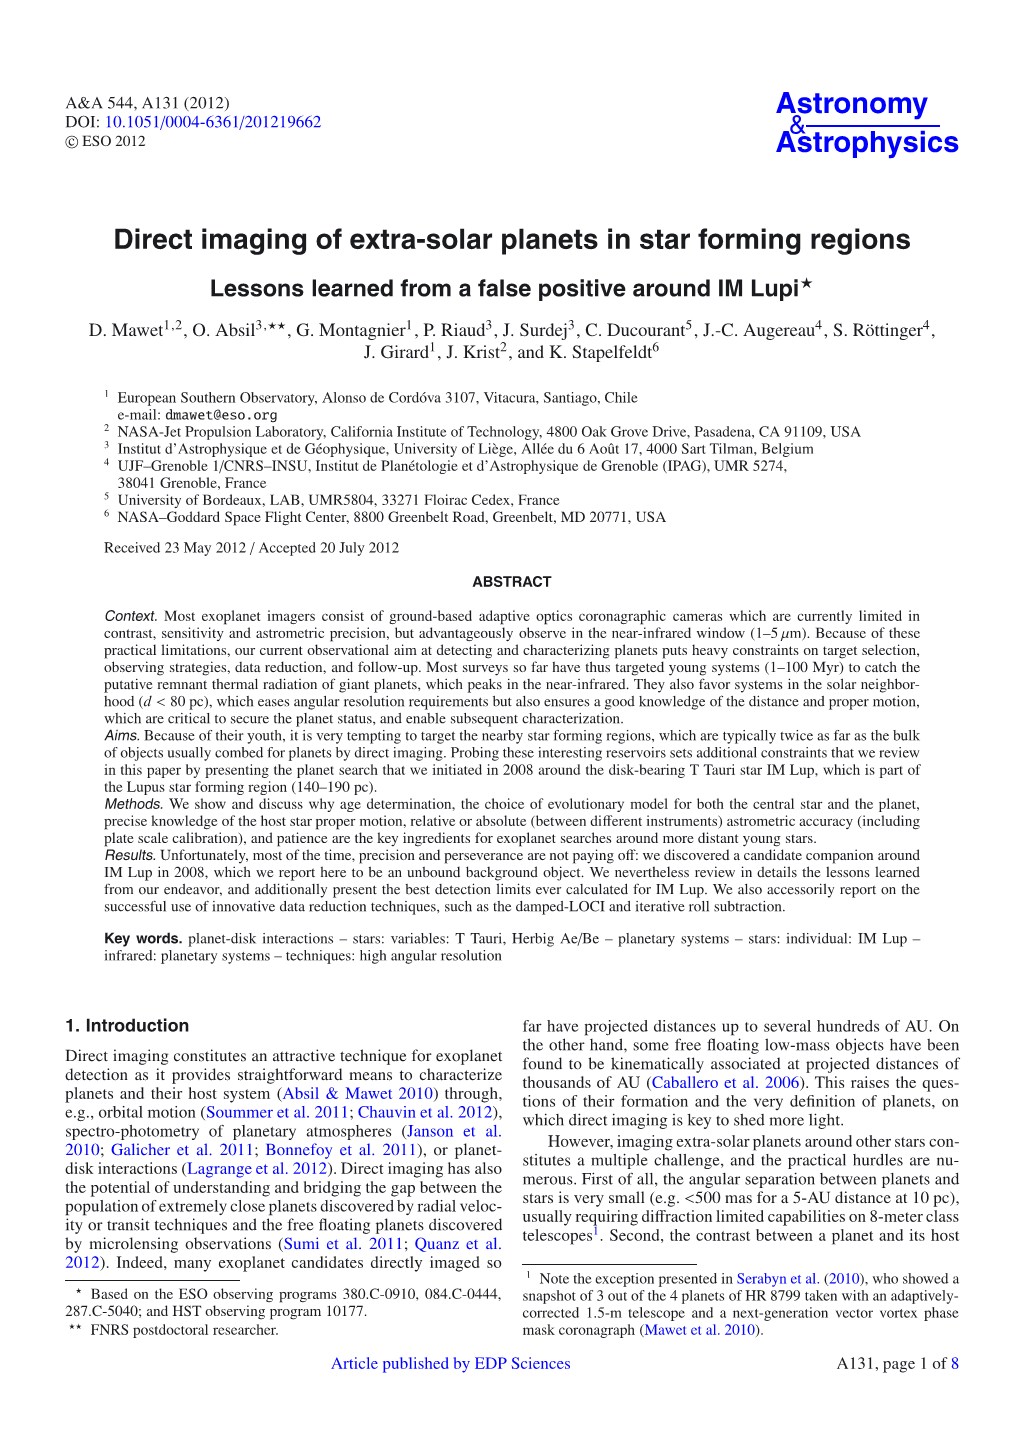 Direct Imaging of Extra-Solar Planets in Star Forming Regions Lessons Learned from a False Positive Around IM Lupi